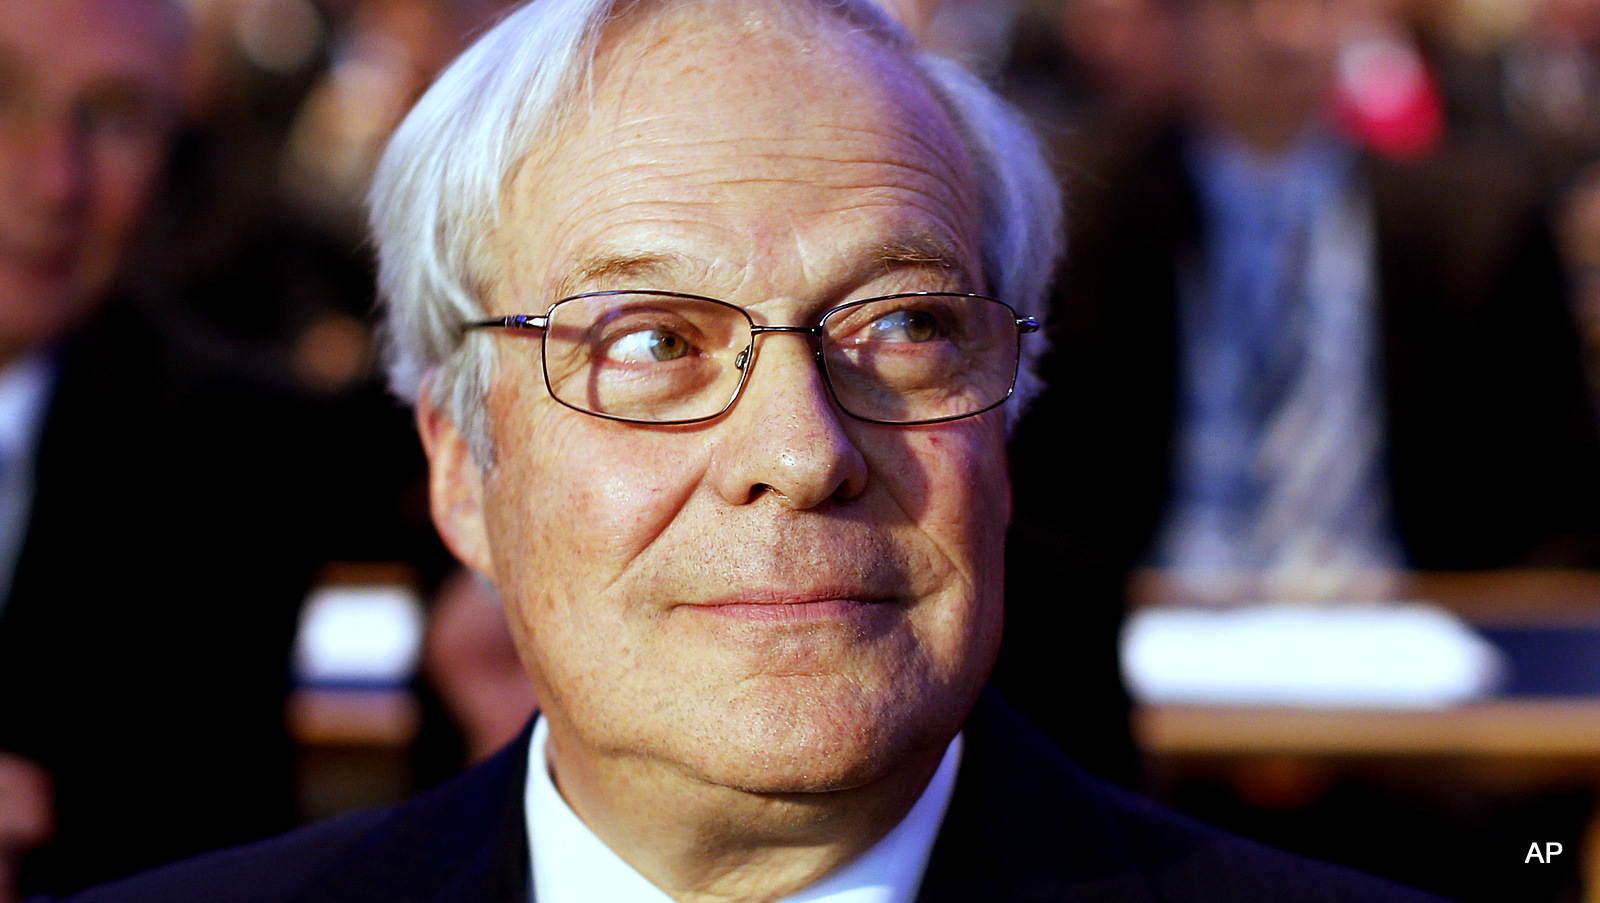 Baron David de Rothschild, Chairman of Rothschild Bank, waits for the beginning of an award ceremony after being elected "European Banker of the Year 2011" in Frankfurt, Germany, Monda